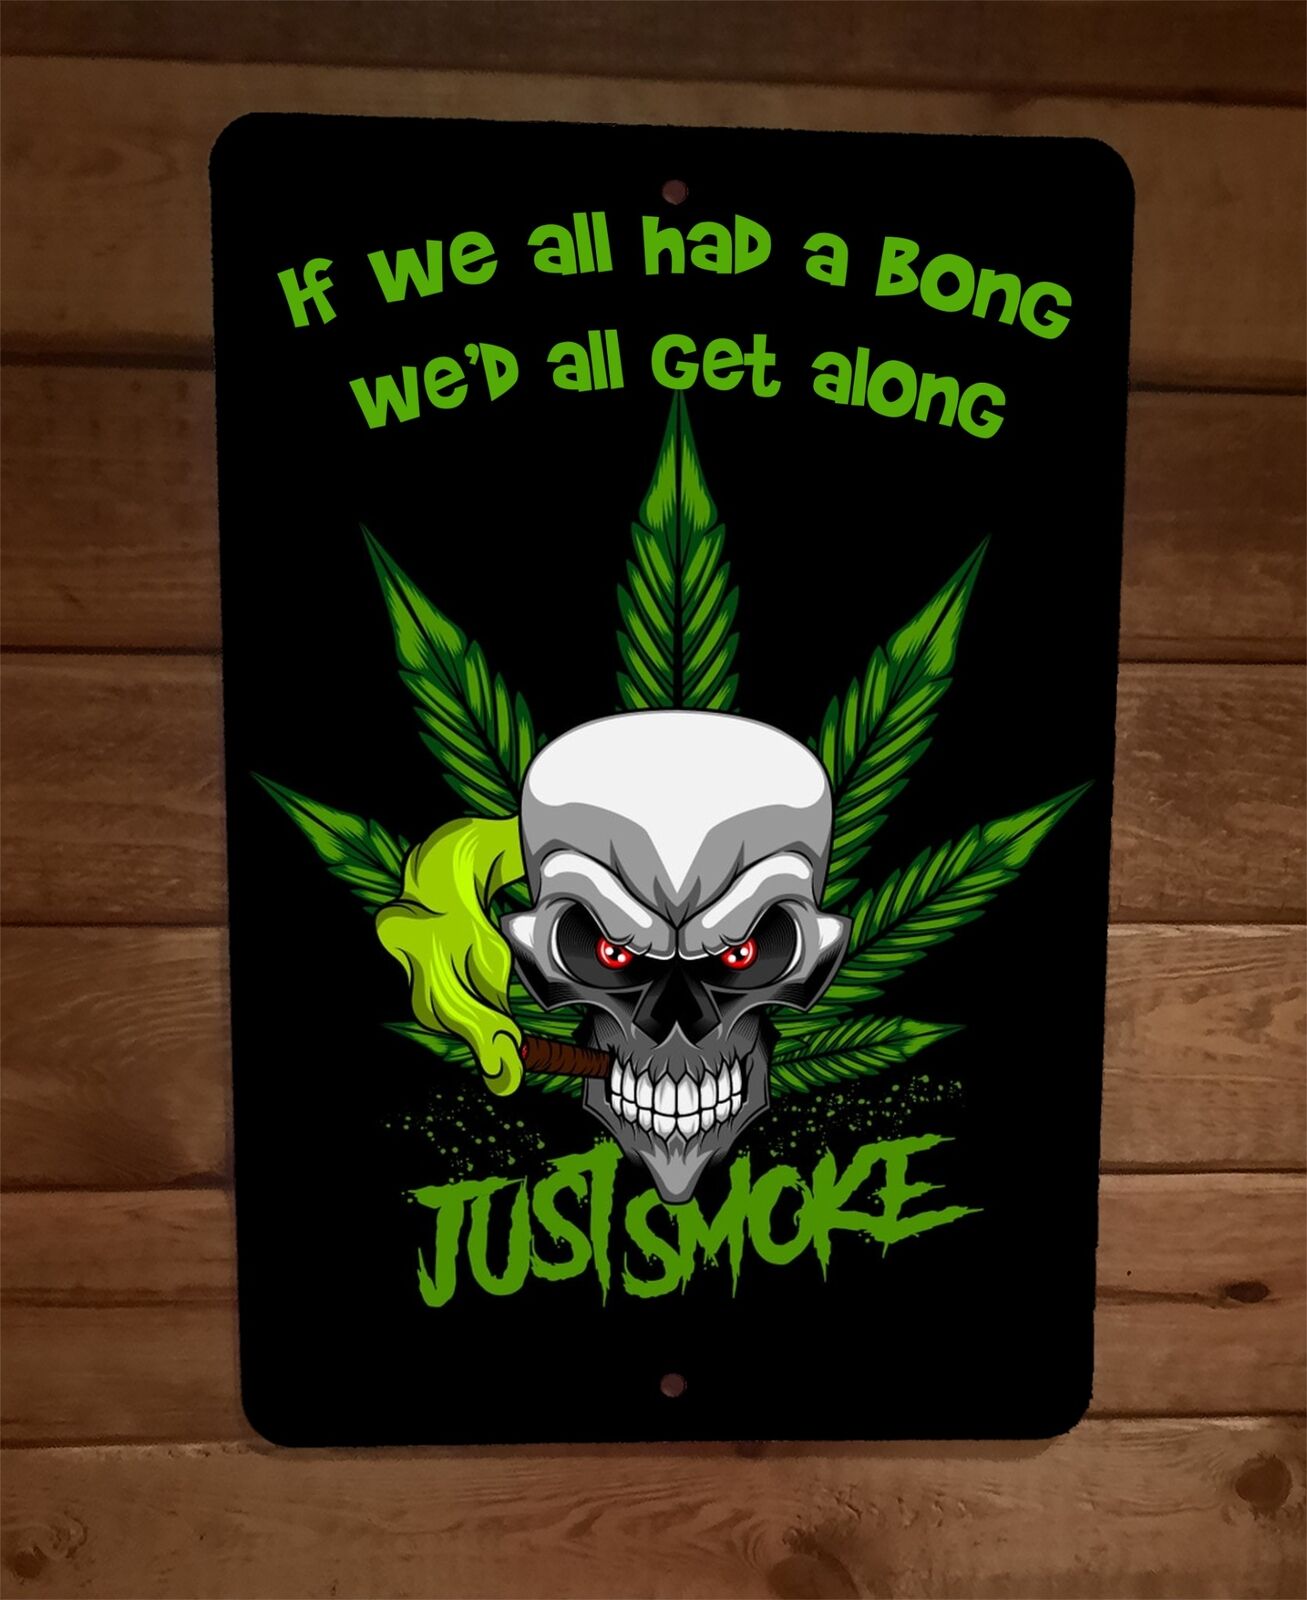 If We All Had a Bong Wed All Get Along 8x12 Metal Wall Sign 420 Mary Jane